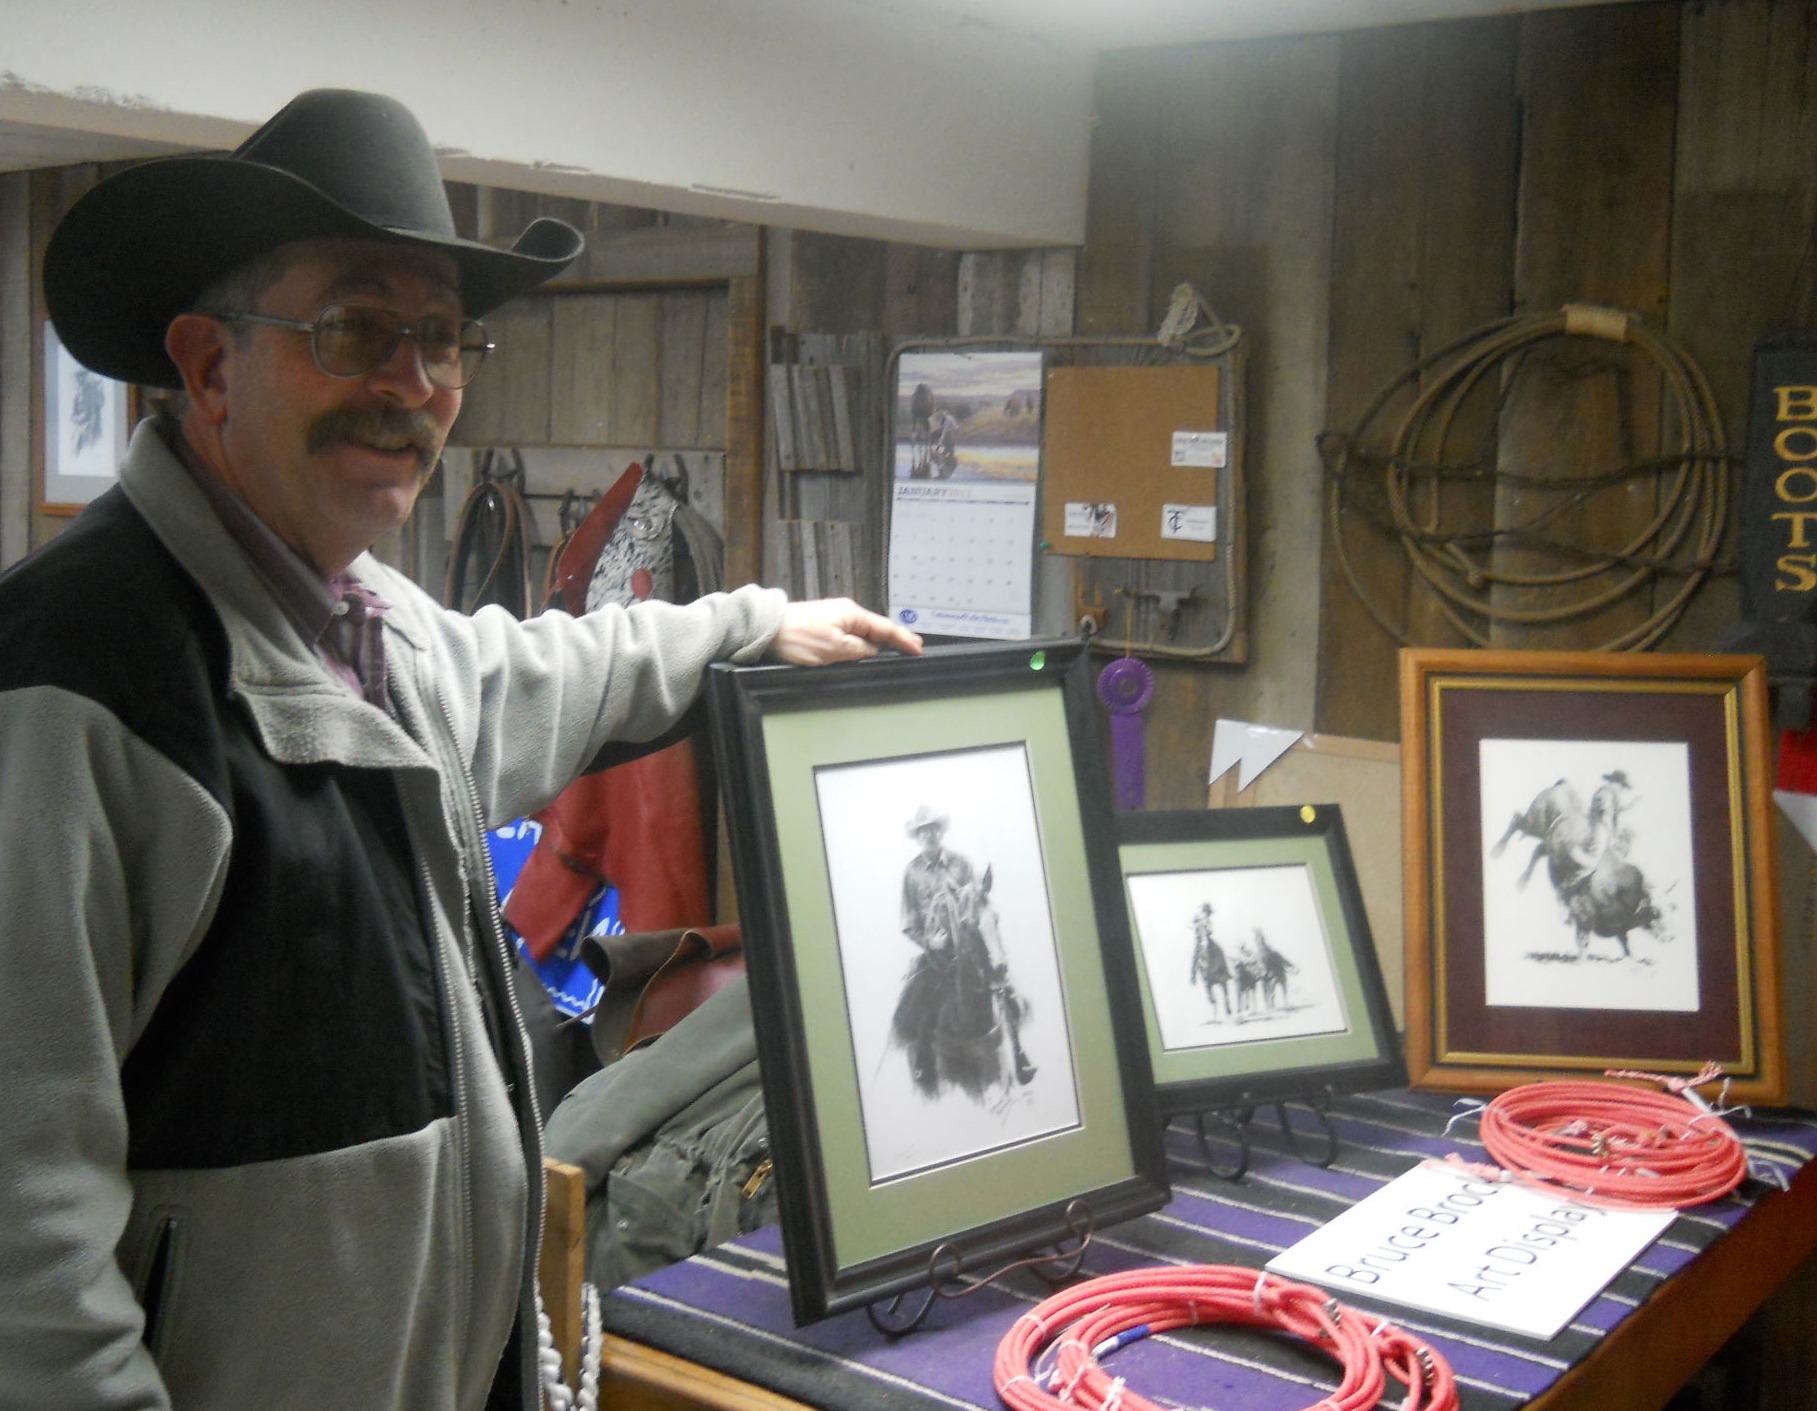 Leather craftsman-cowboy Bruce Brock is an artist, too, as verified by these elaborate pen-and-ink sketches, among the many diverse drawings and paintings he’s done and has displayed in the lower level of Jim Bell and Son, Cottonwood Falls.